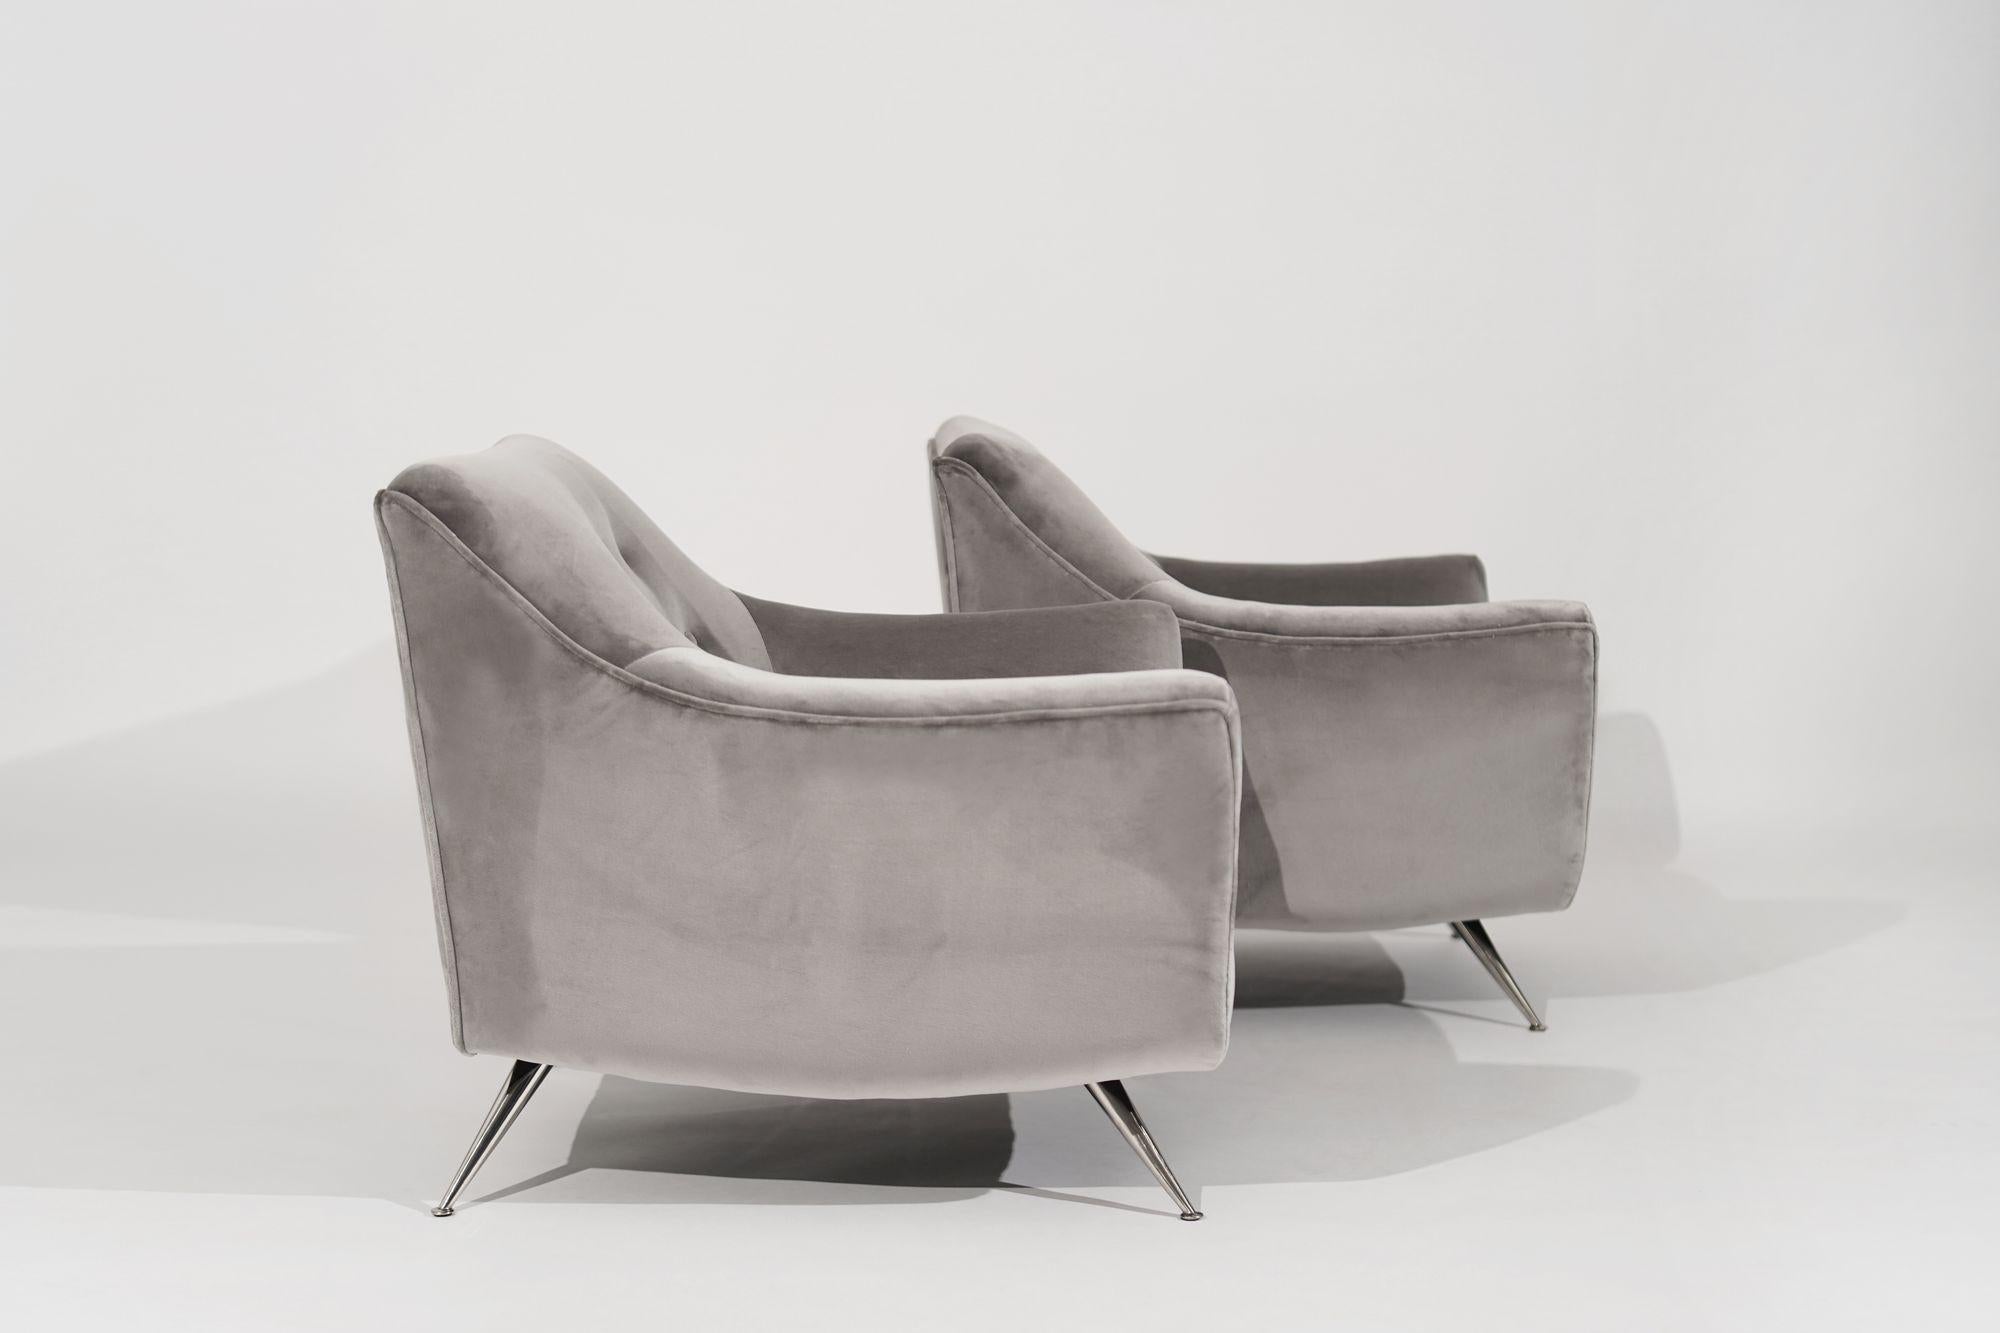 Mid-Century Modern Set of Lounge Chairs by Henry Glass in Grey Alpaca Velvet, C. 1950s For Sale